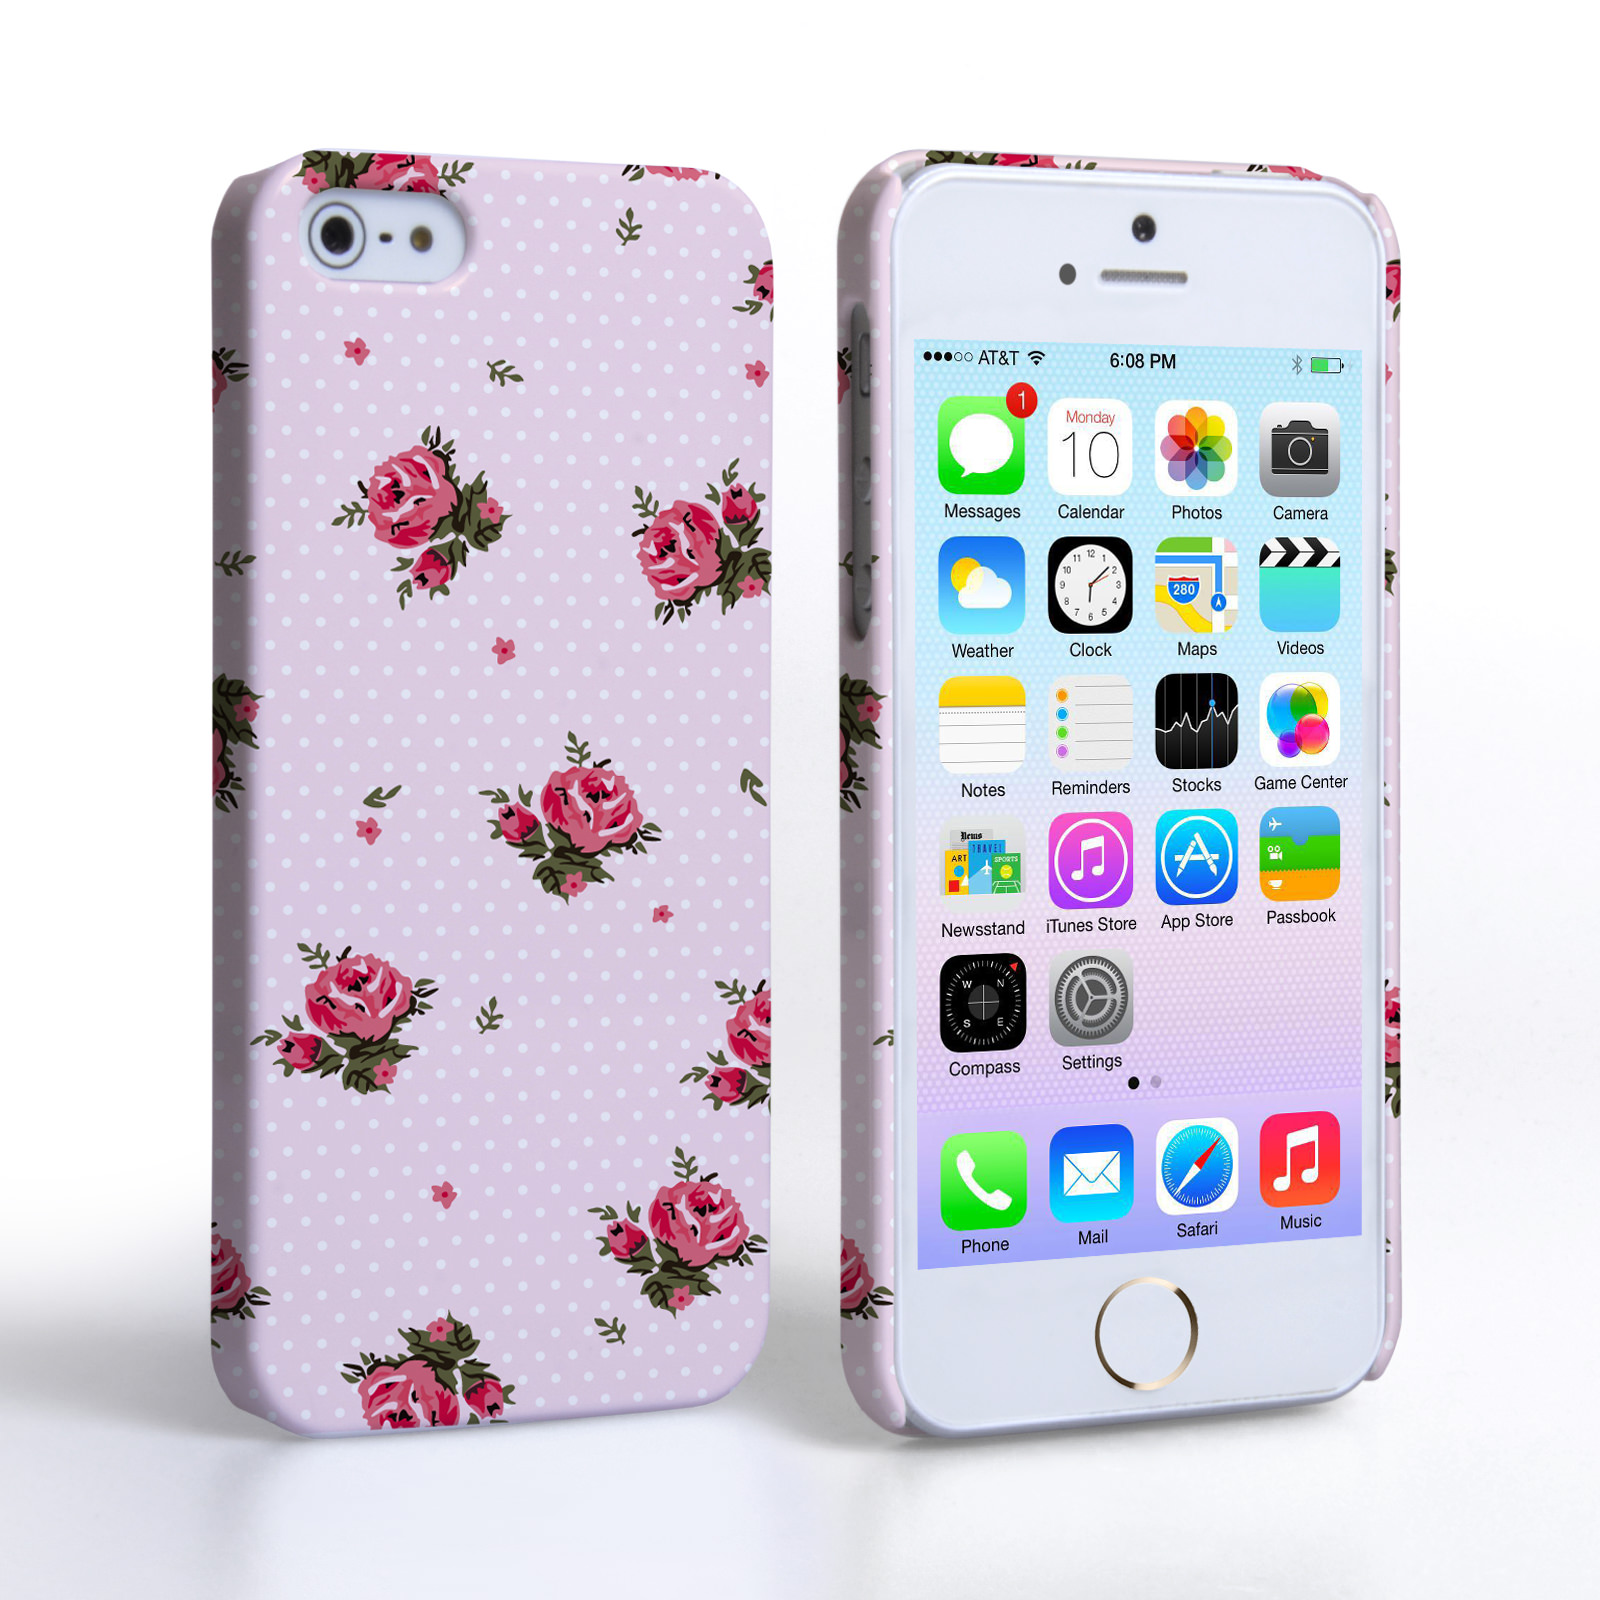 Caseflex Iphone Se Vintage Roses Polka Dot Wallpaper - Iphone 5s Case With Quote - HD Wallpaper 